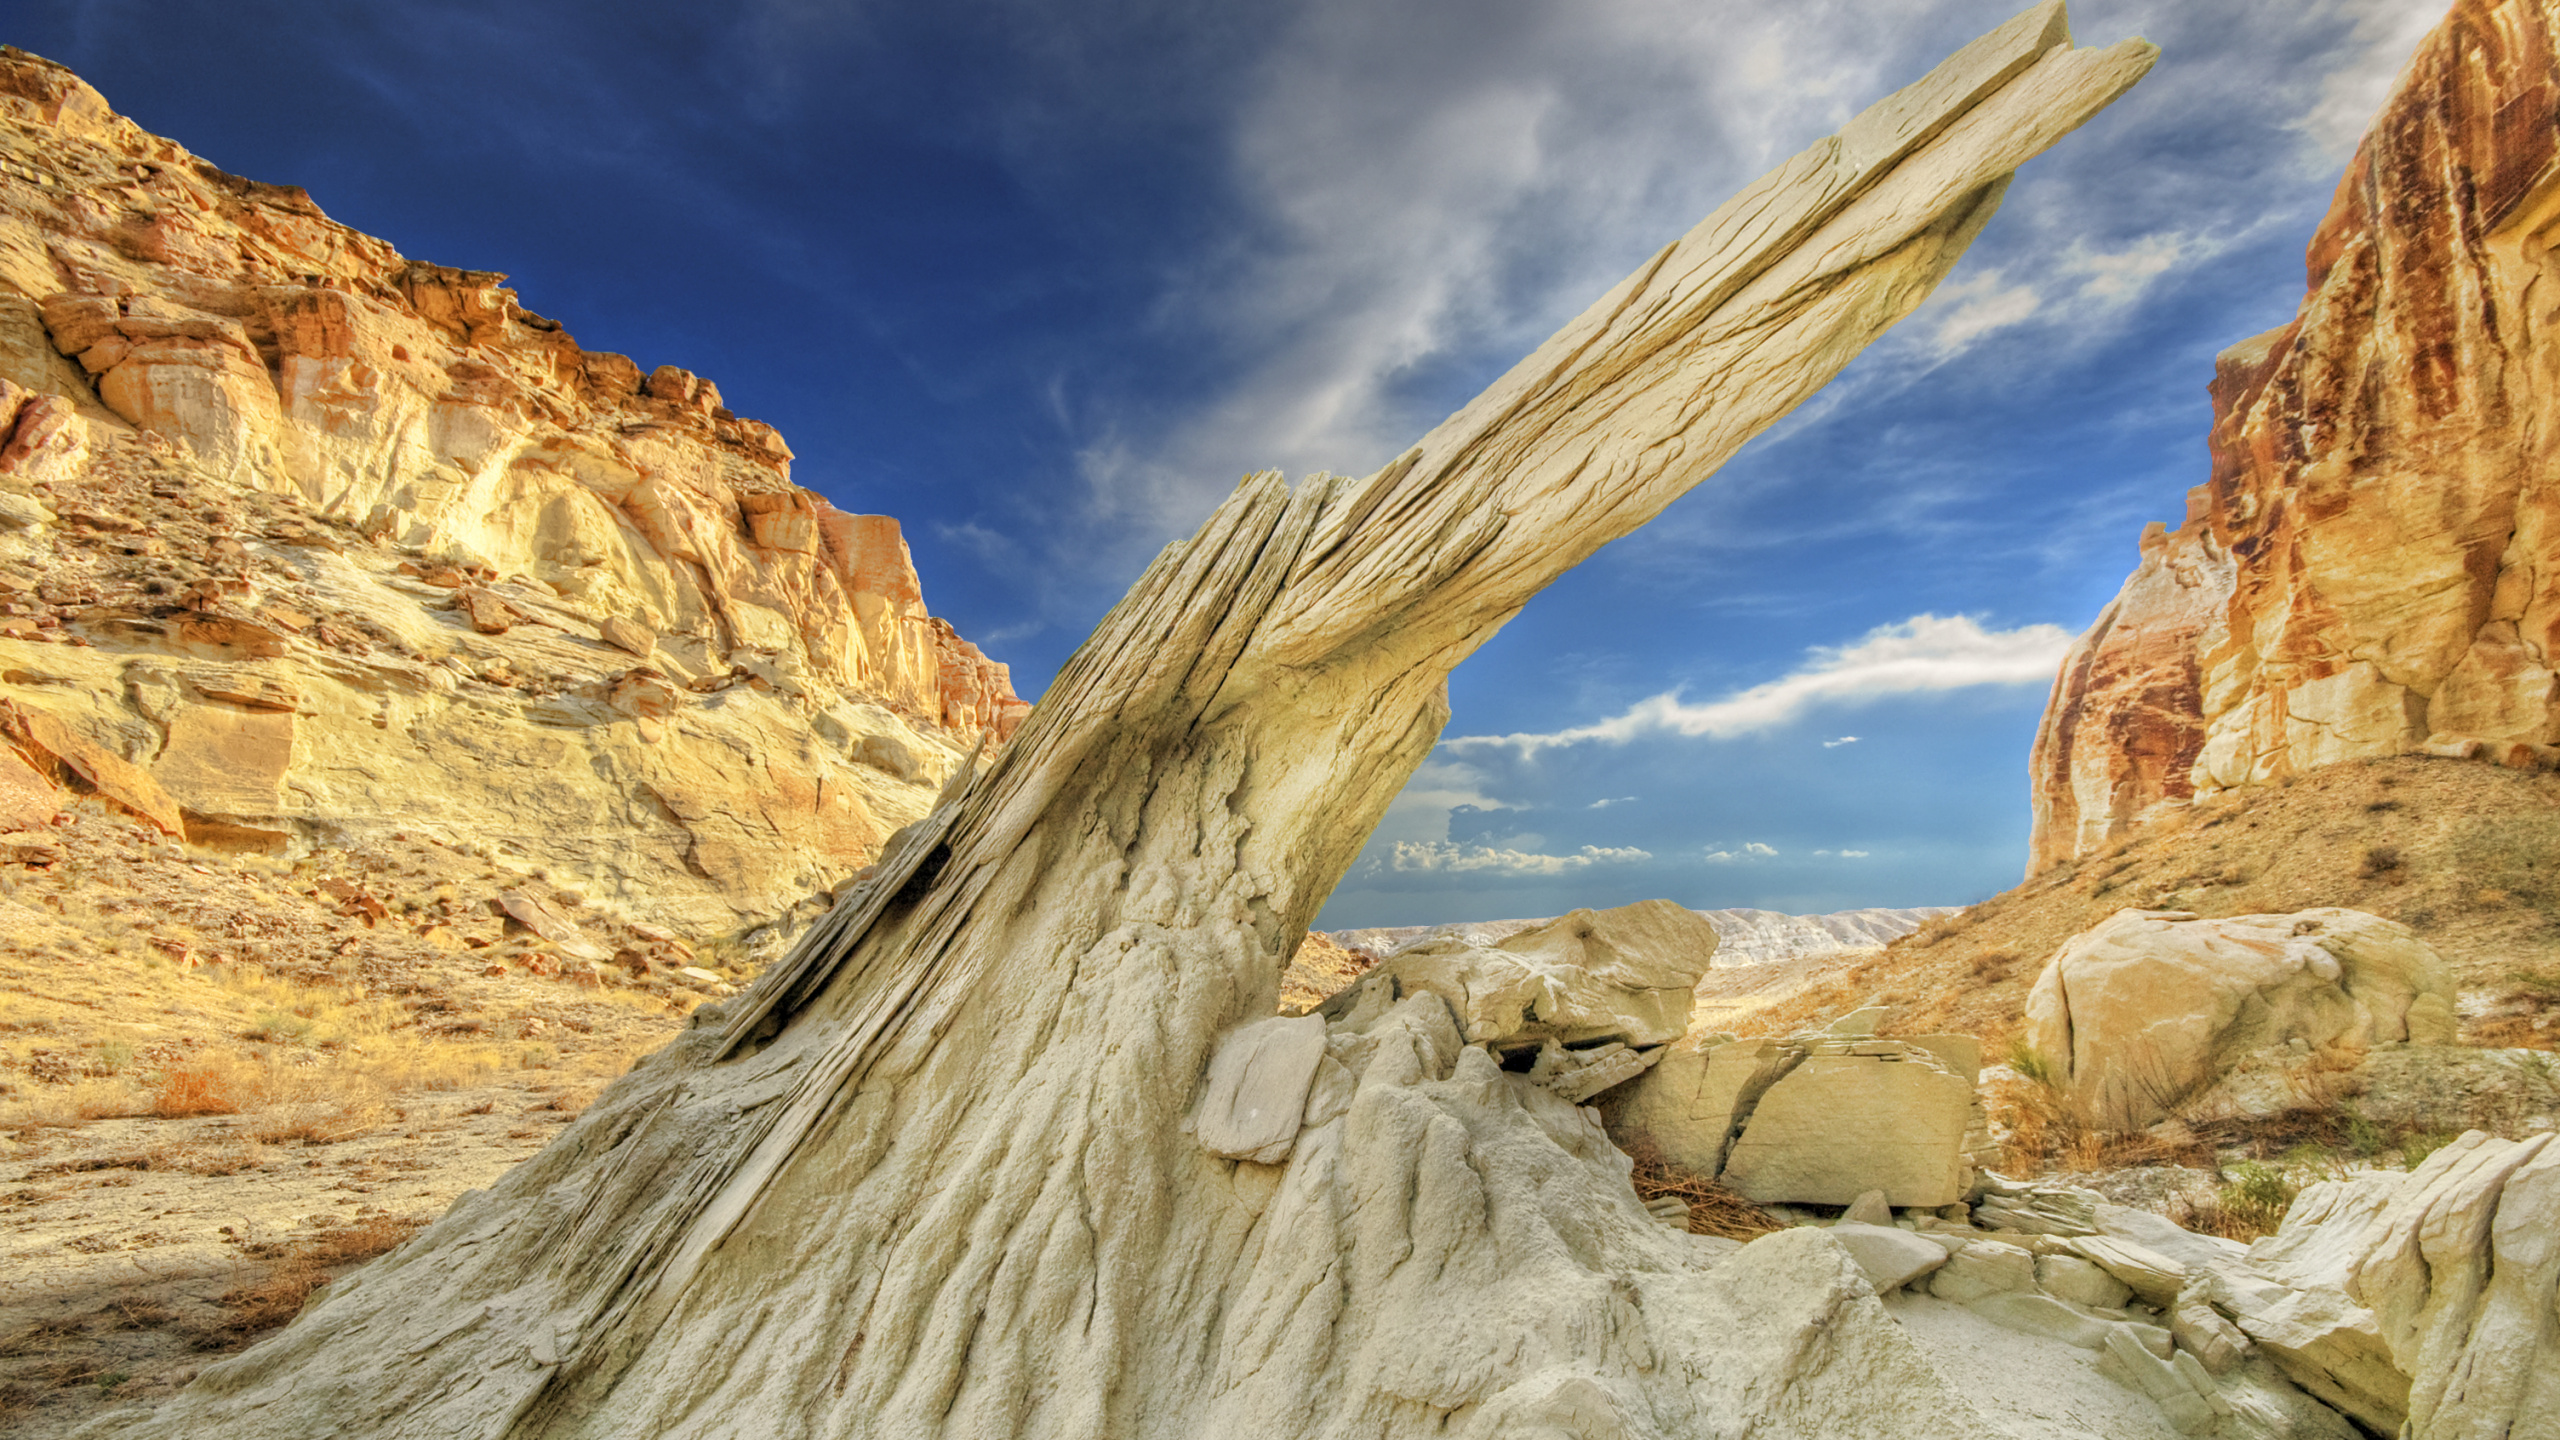 Brown Rock Formation Under Blue Sky and White Clouds During Daytime. Wallpaper in 2560x1440 Resolution